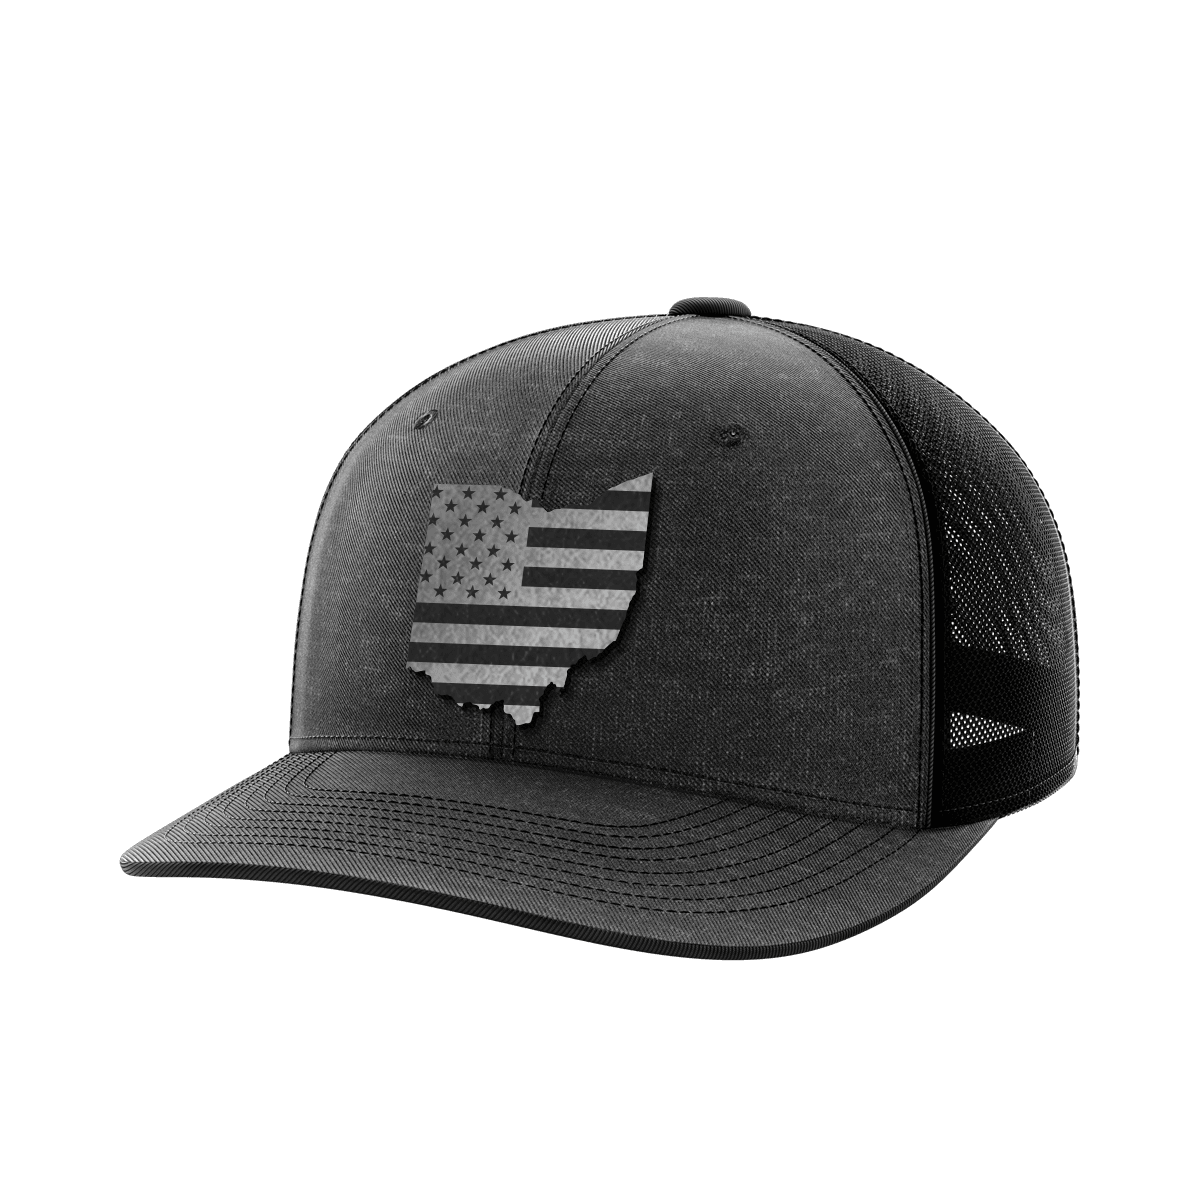 Ohio United Collection (black leather) - Greater Half